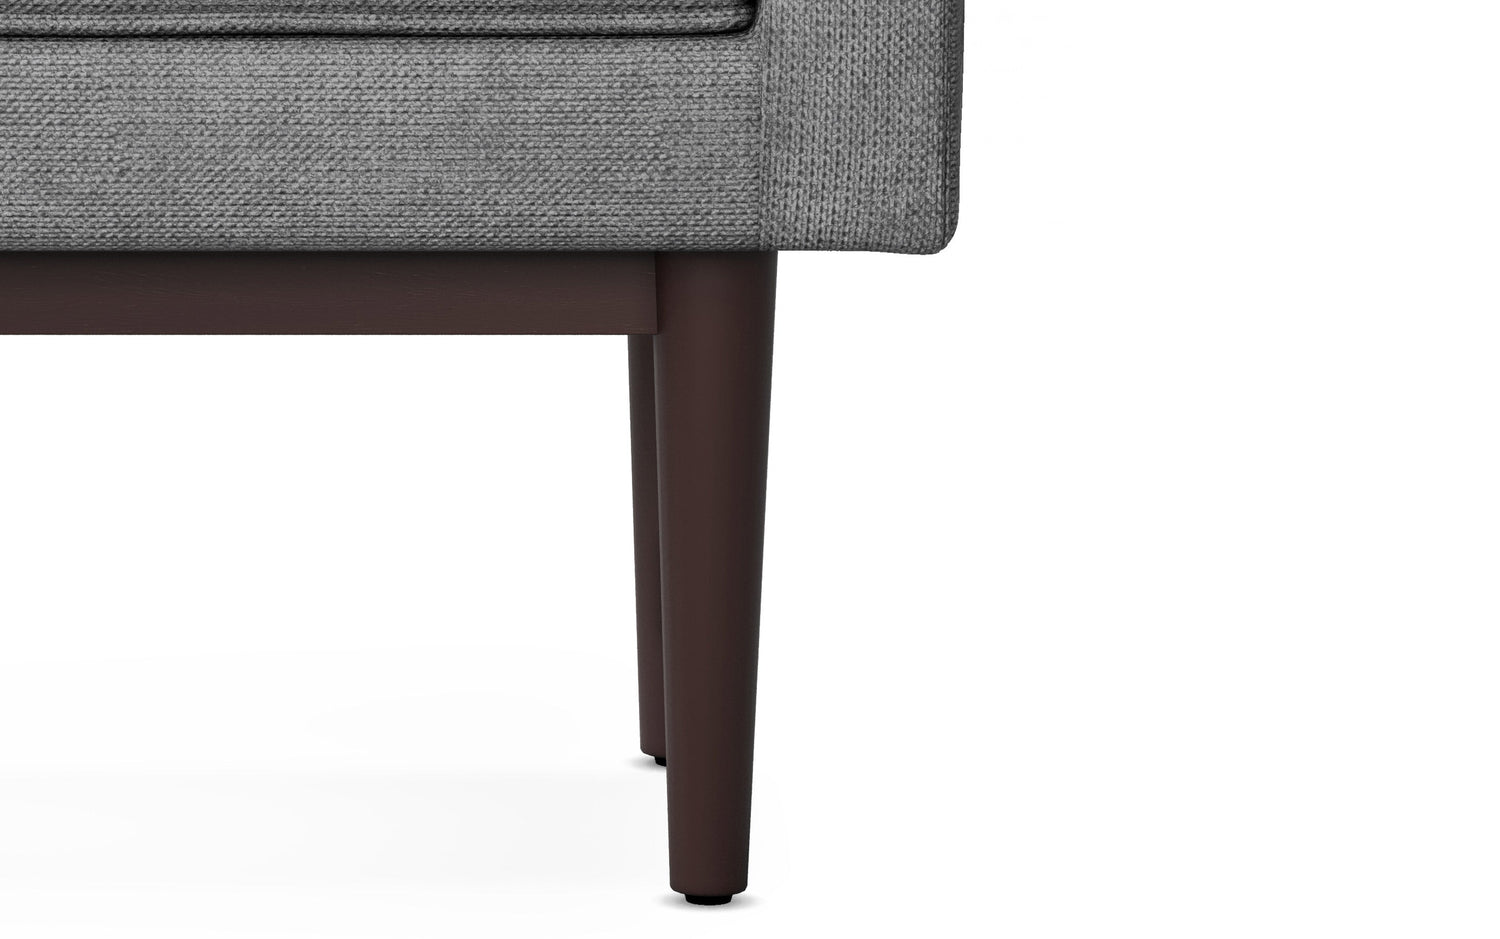 Pewter Grey Linen Style Polyester | Scott Small Ottoman Bench